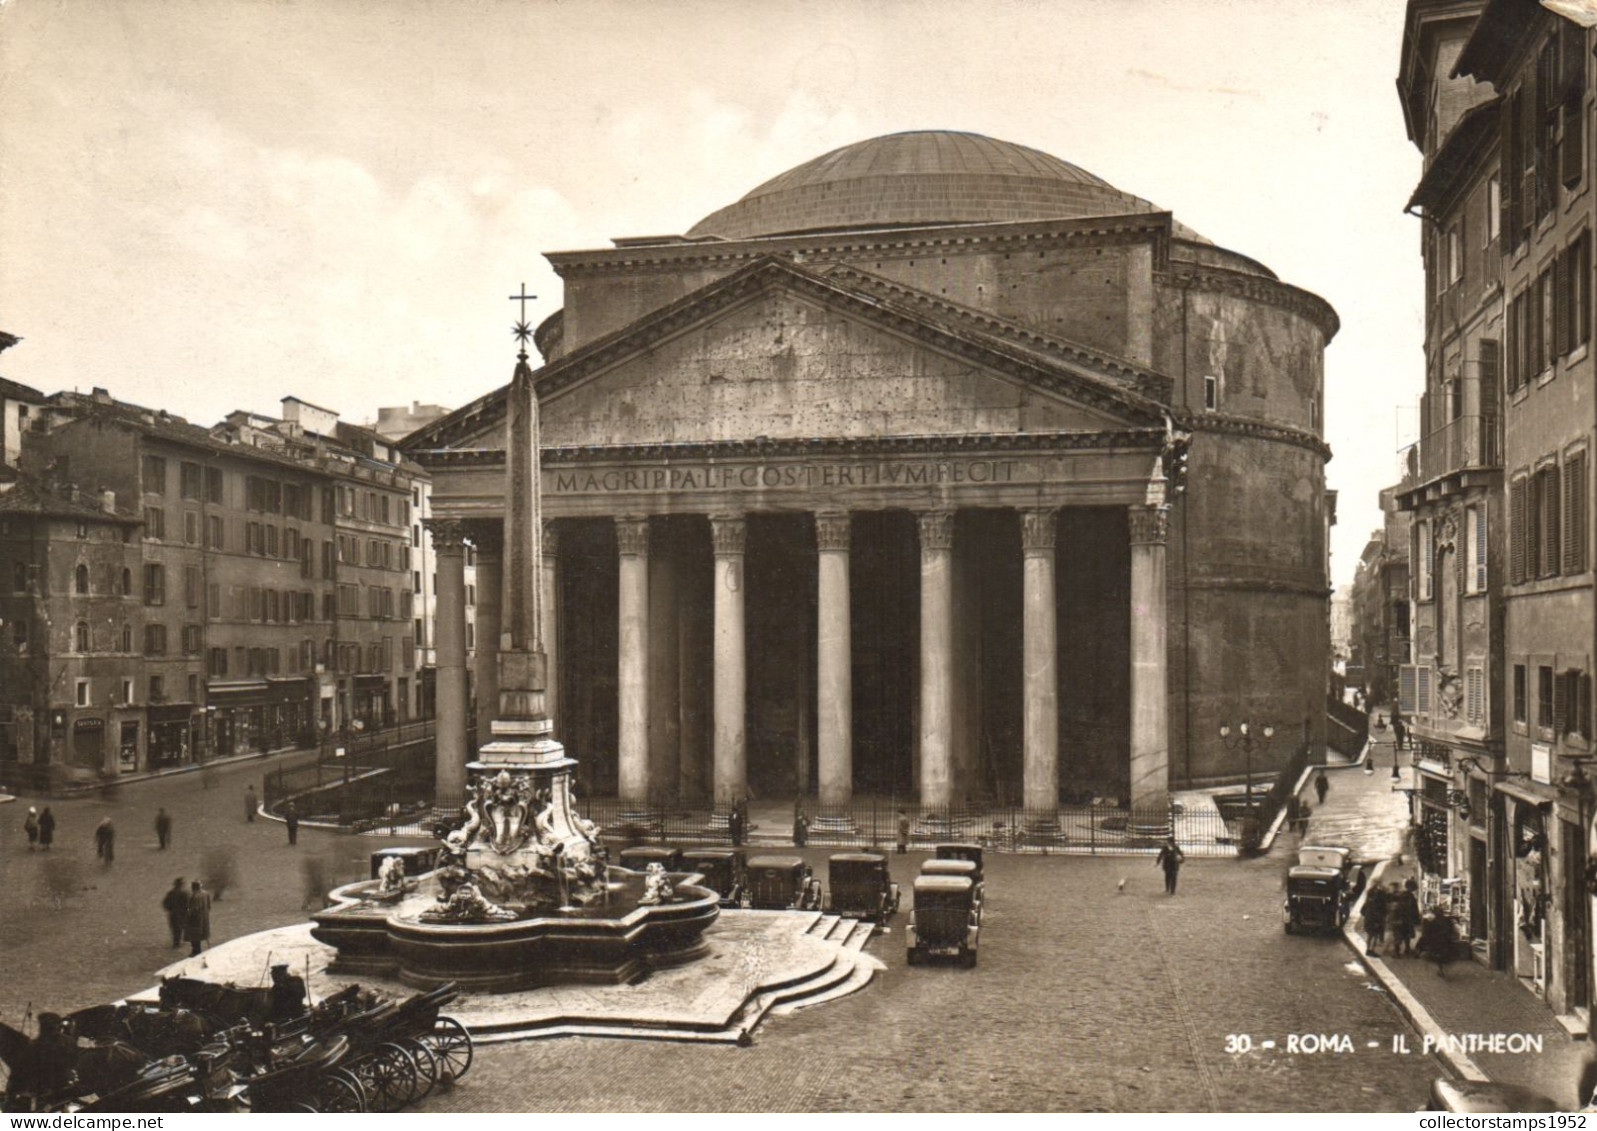 ROME, PANTHEON, ARCHITECTURE, MONUMENT, FOUNTAIN, CARS, CARRIAGE, ITALY, POSTCARD - Pantheon